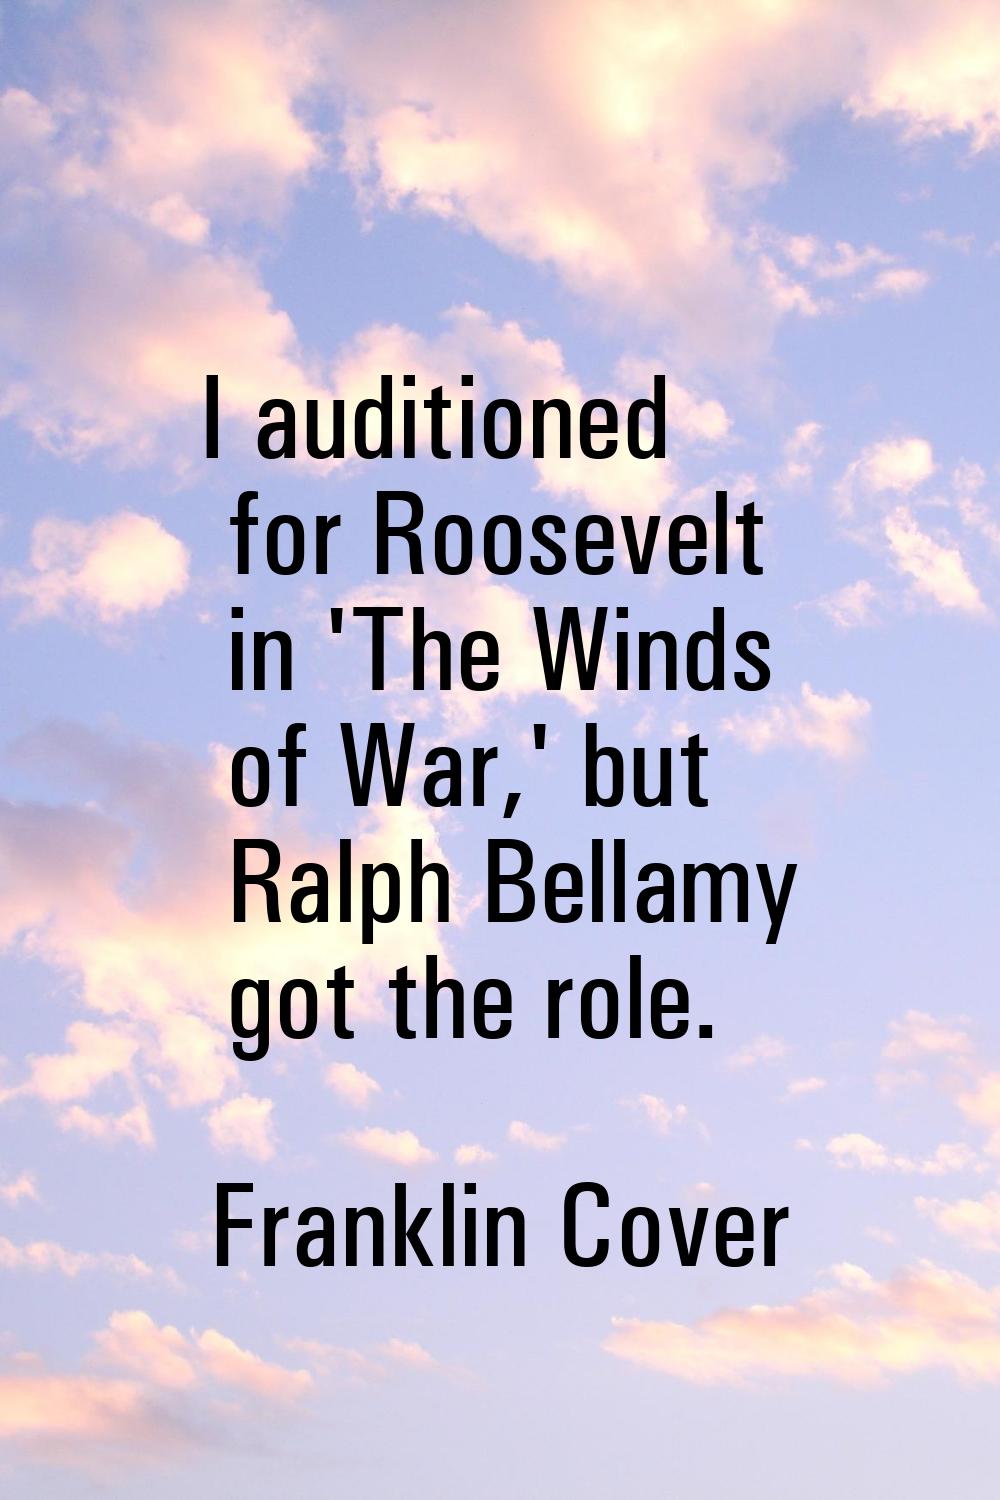 I auditioned for Roosevelt in 'The Winds of War,' but Ralph Bellamy got the role.